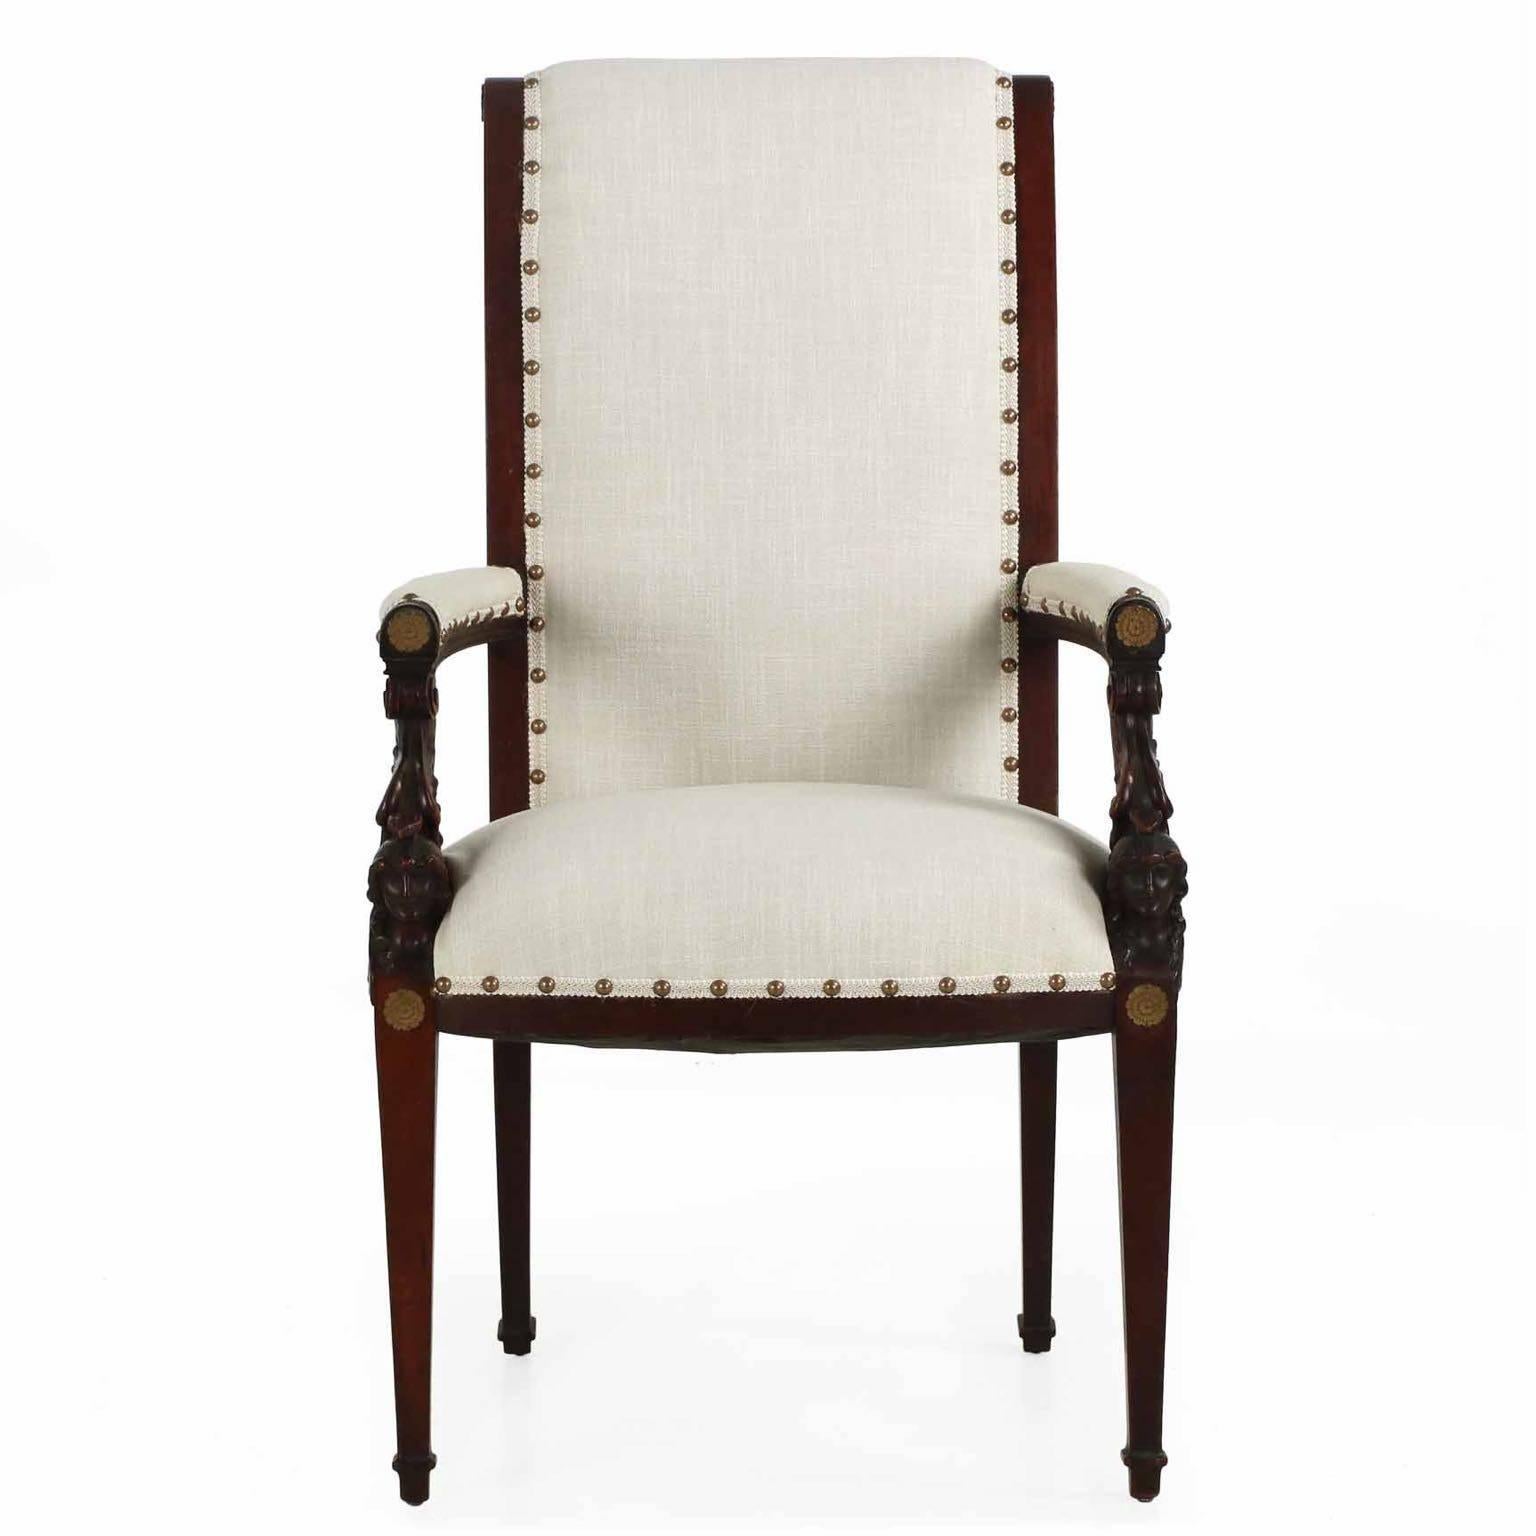 An incredibly striking armchair from the third quarter of the 19th century, this gorgeous piece is carved with inordinate care from huge solid blocks of mahogany to form the crisp helmeted and winged figures flanking either side of the seat. The